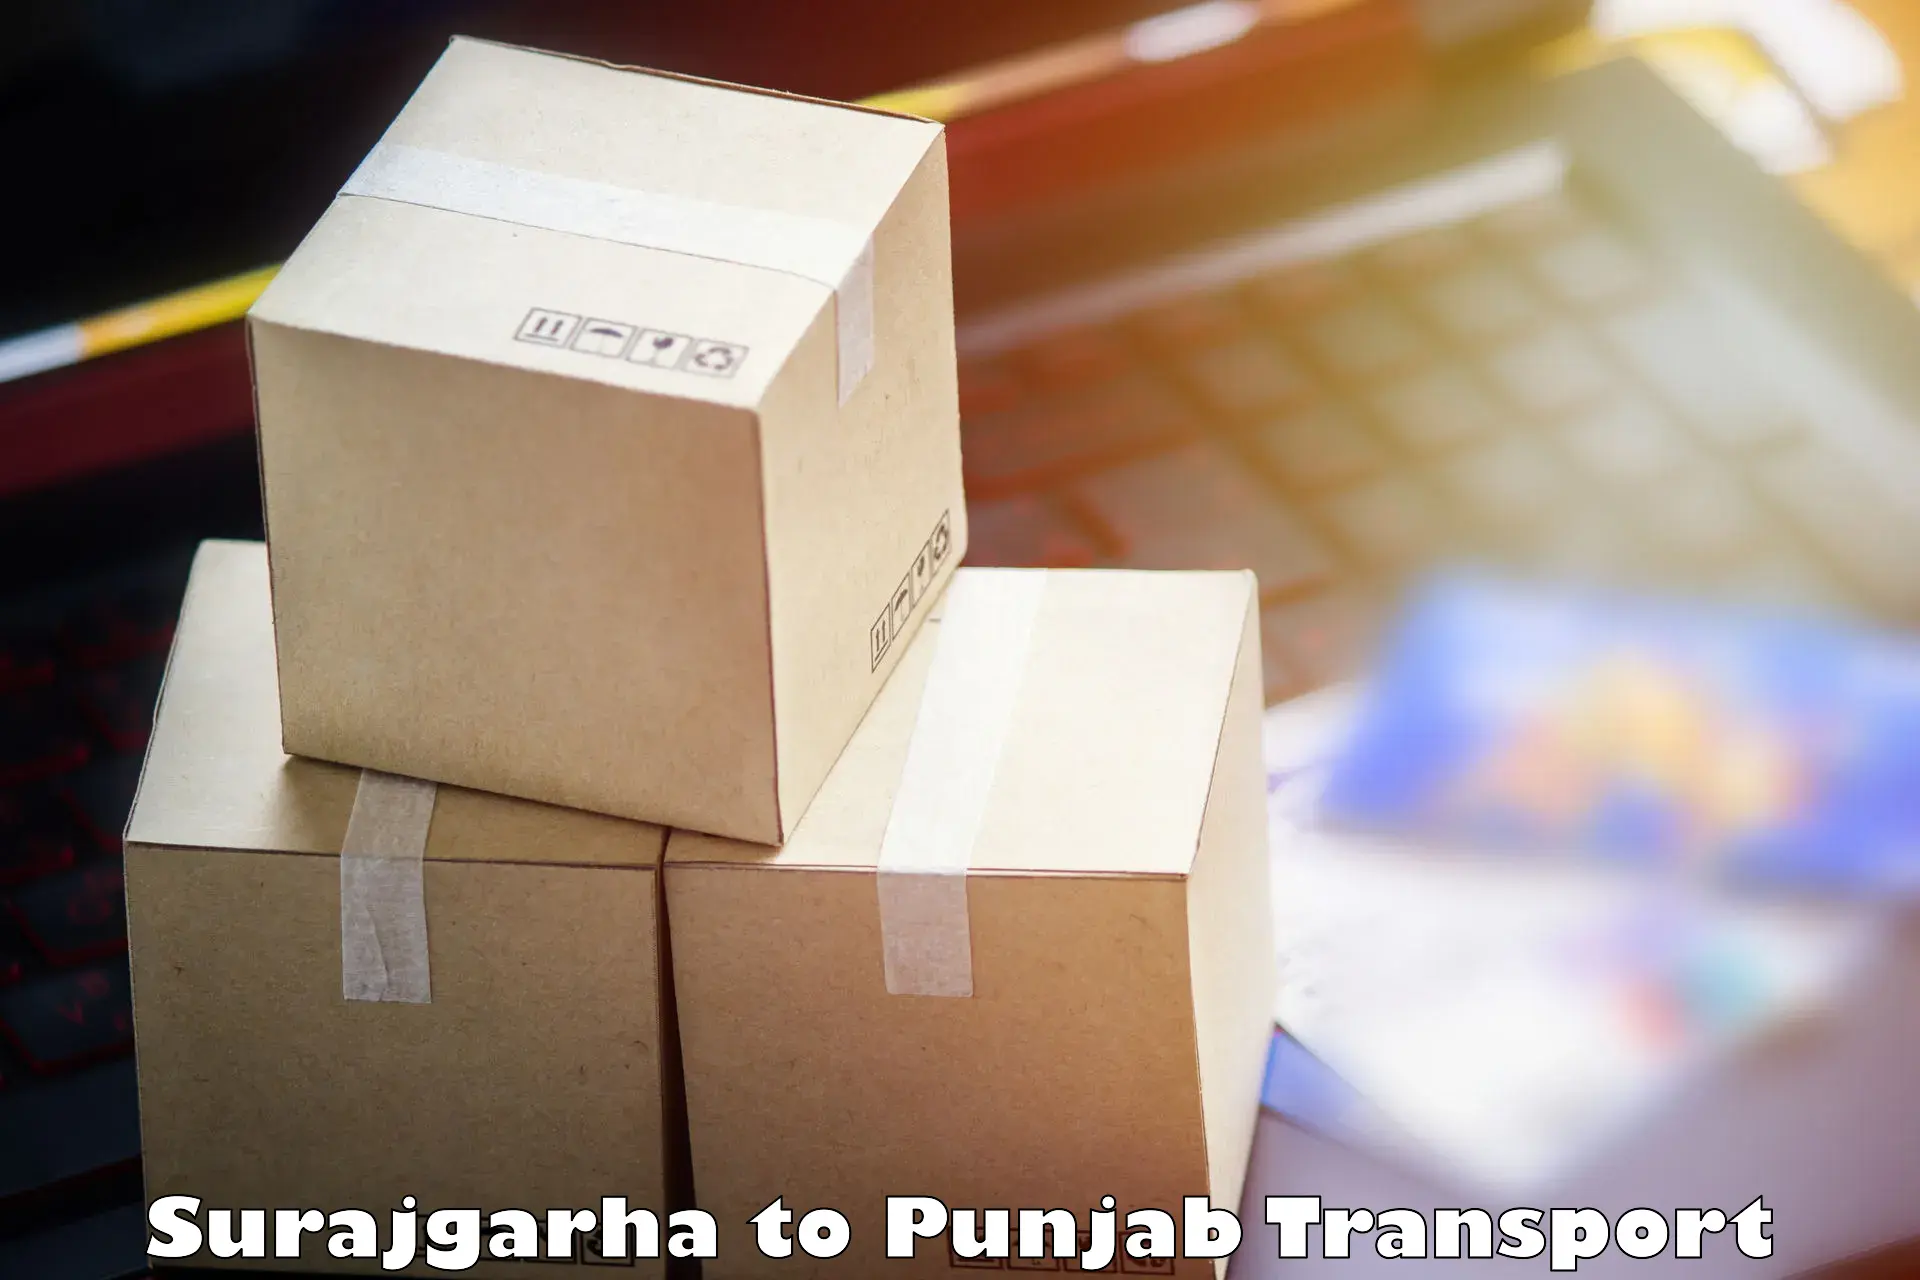 Road transport services Surajgarha to Mohali